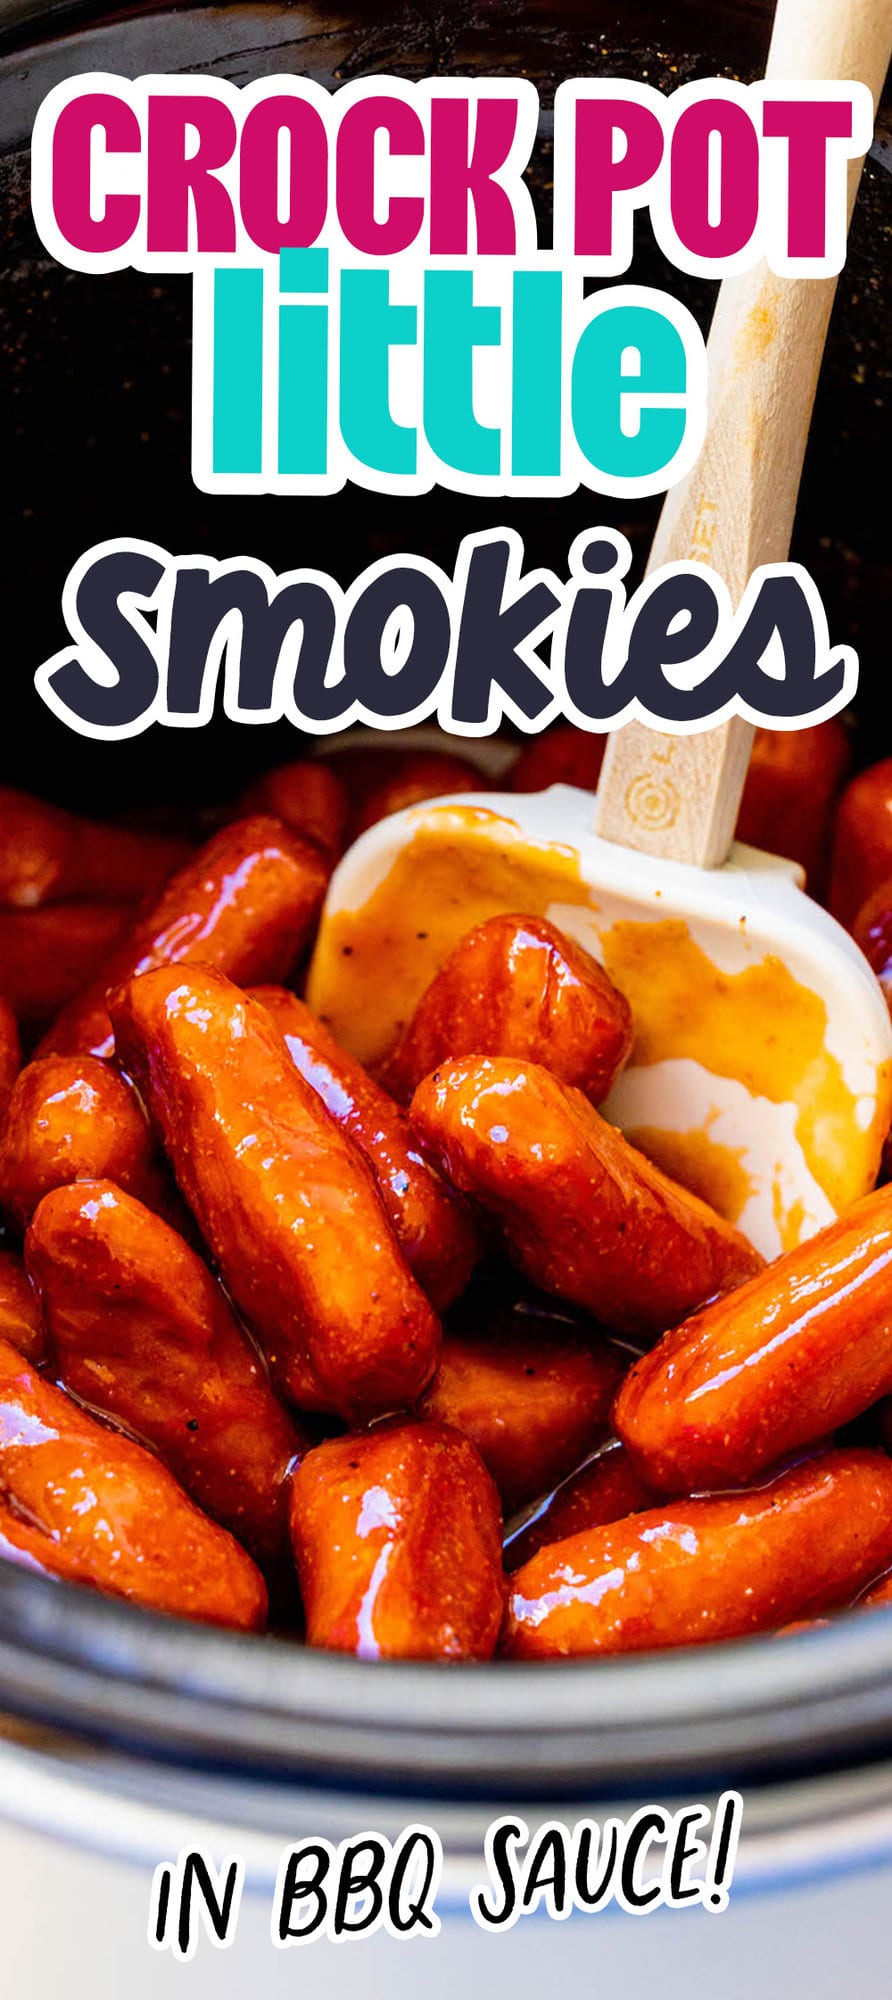 little smokies in bbq sauce in a blue bowl in front of a crock pot on a table